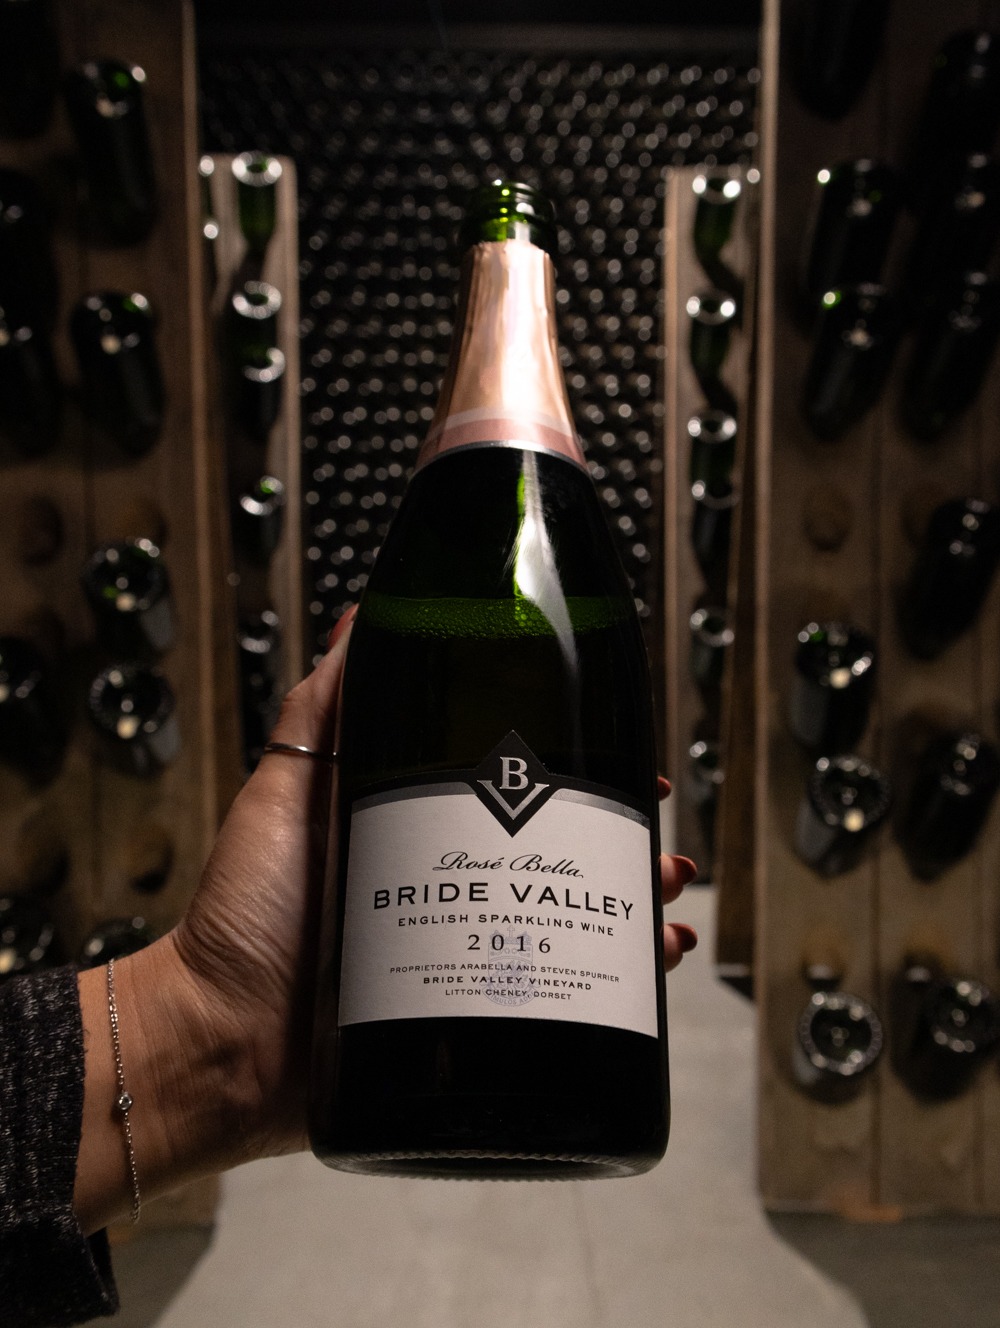 Bride Valley Vineyard Rosé Bella Brut 2016																	Bride Valley’s delectable Brut rosé is a triumph of a wine that is drinking fantastic right now… one of the best value method champenoise rosés we’ve ever found in British bubbly!